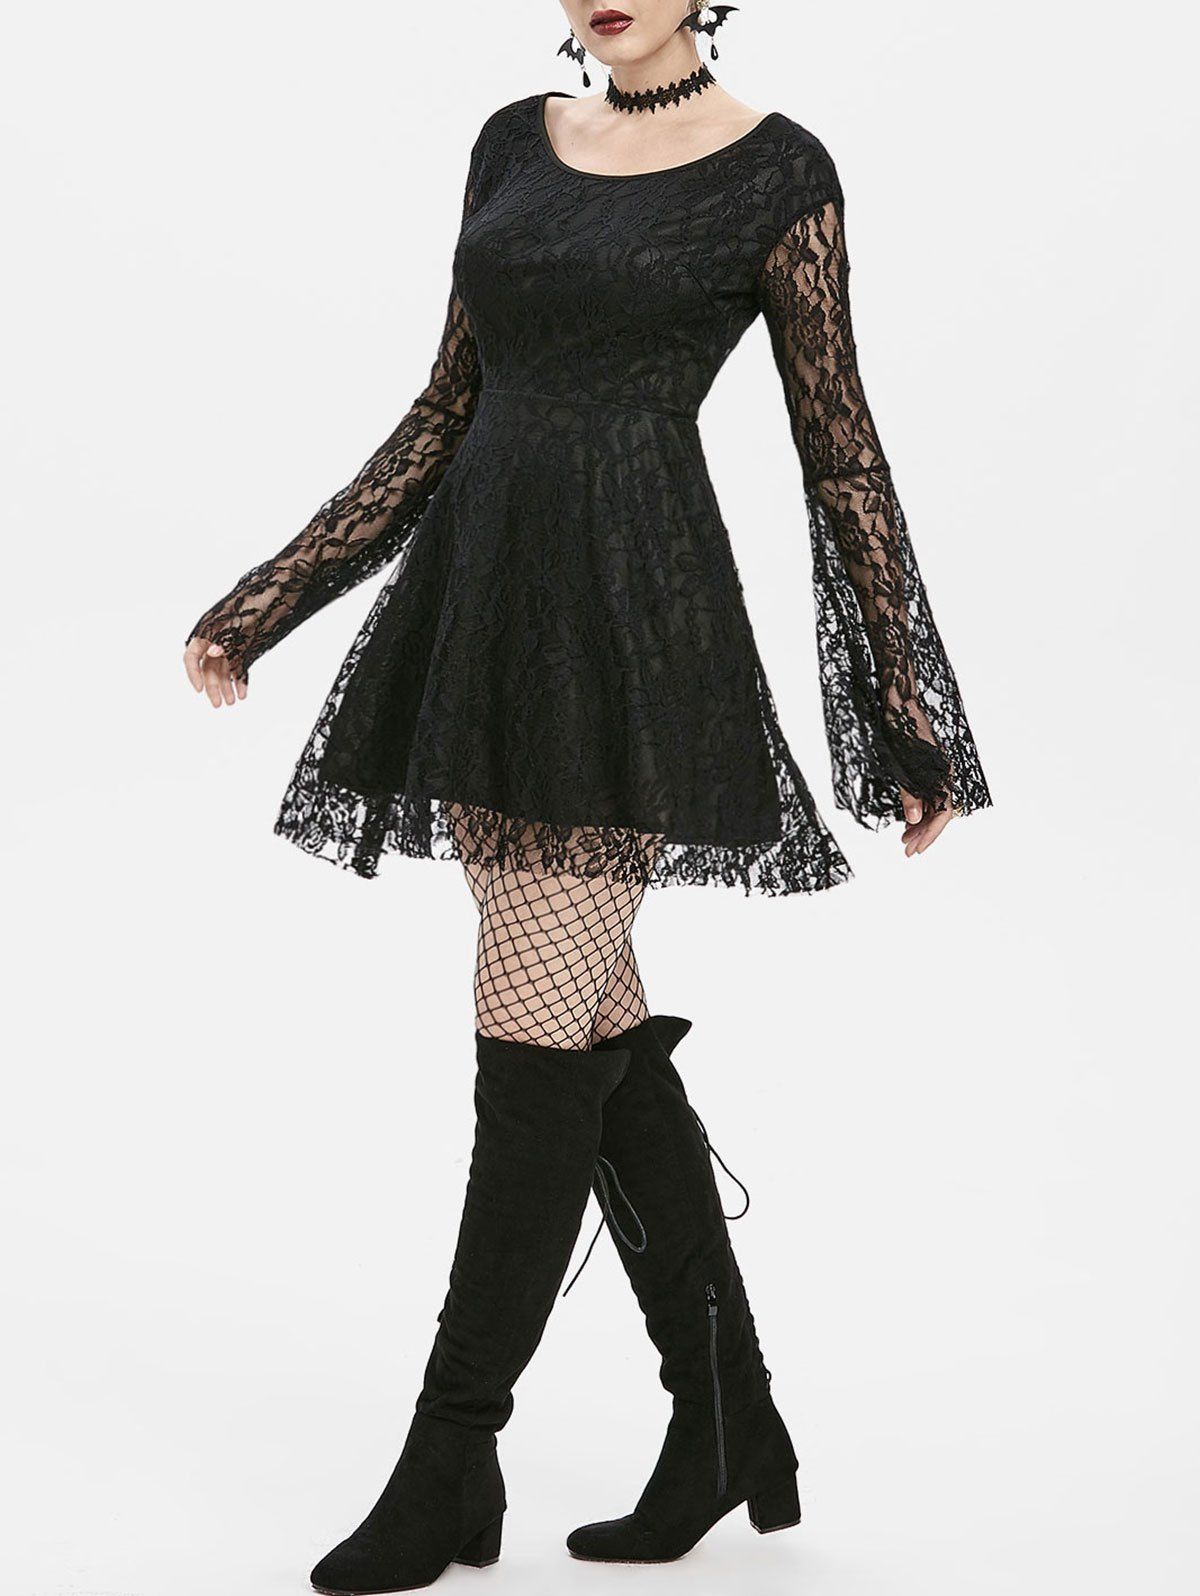 Gothic Bell Sleeve Lace Dress - BLACK 2XL